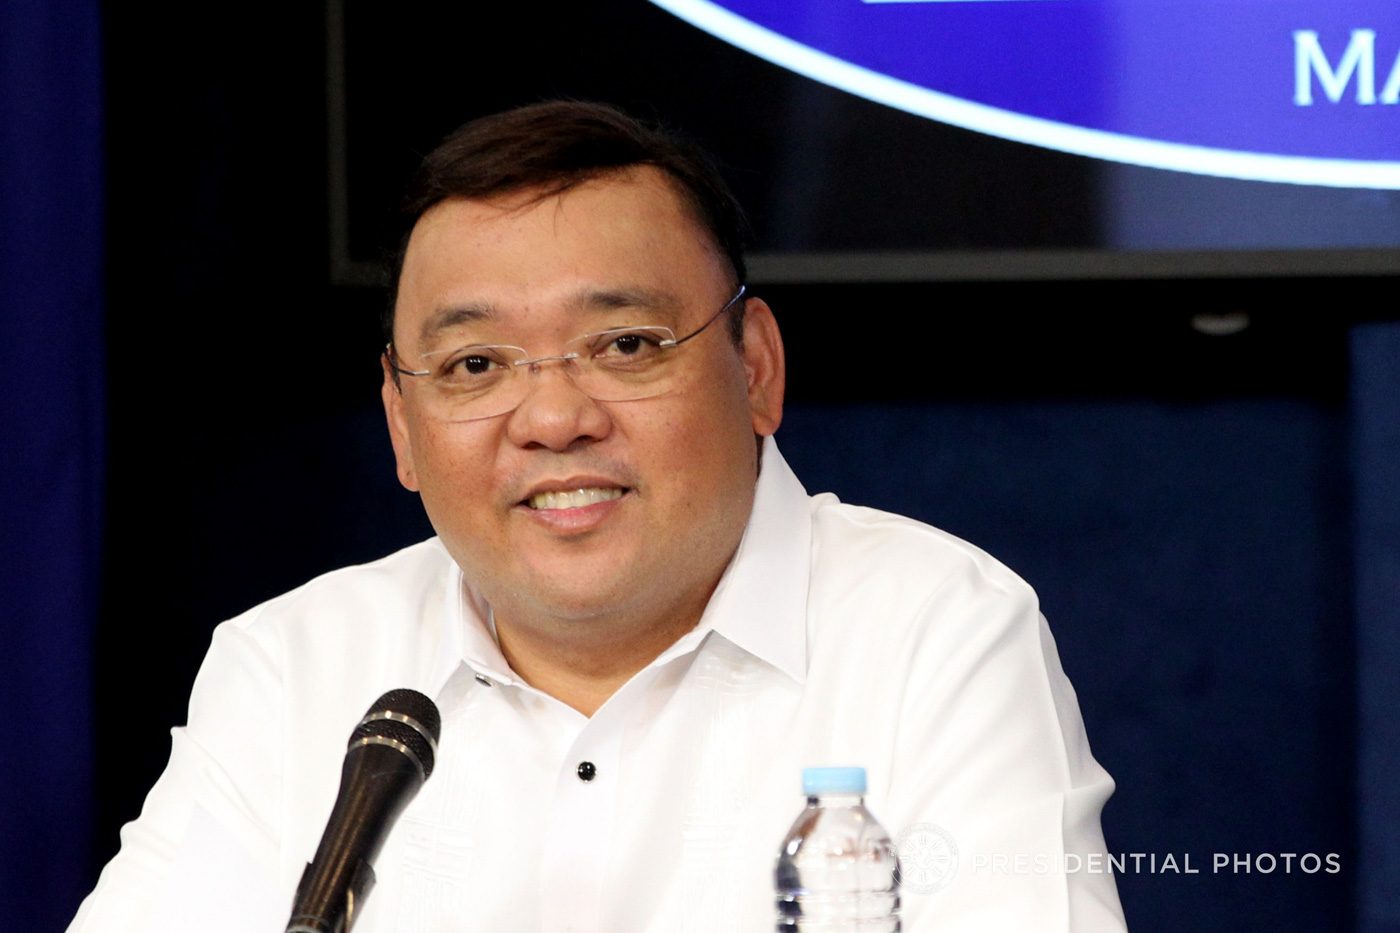 After ‘Norwegia’ gaffe, Roque hopes PCOO can boost spell-checking